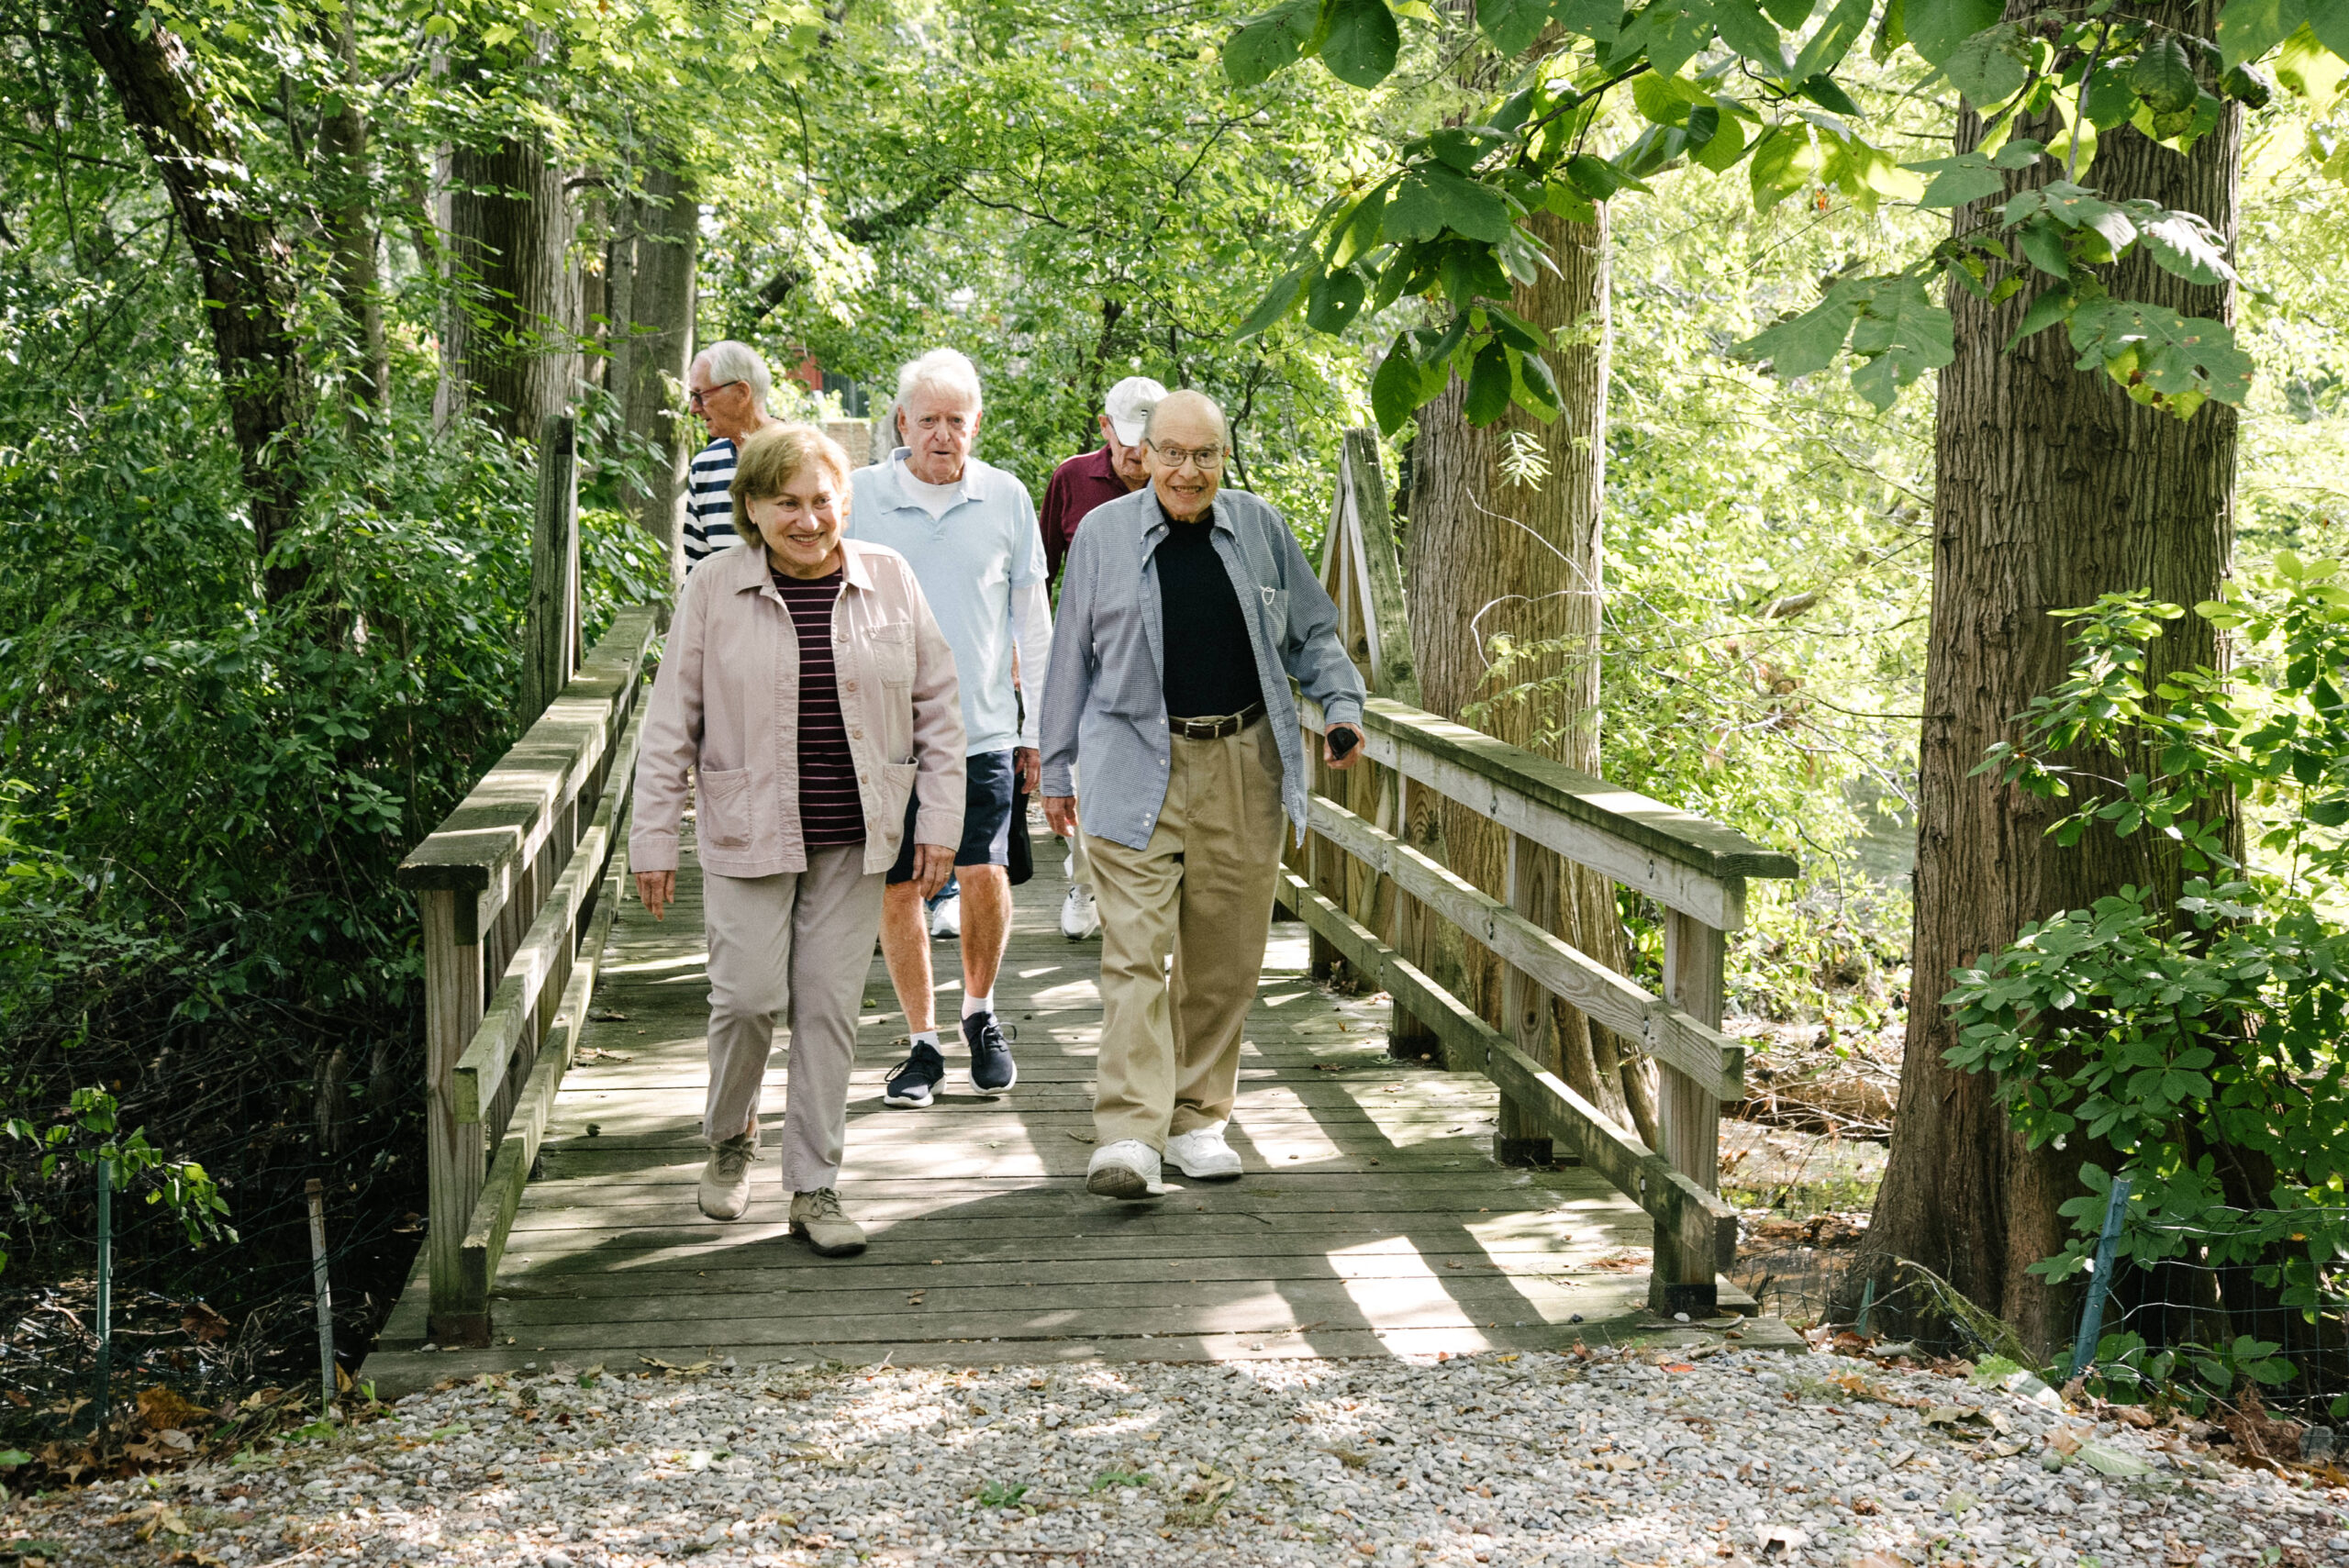 A group of older adults takes a walk through the woods